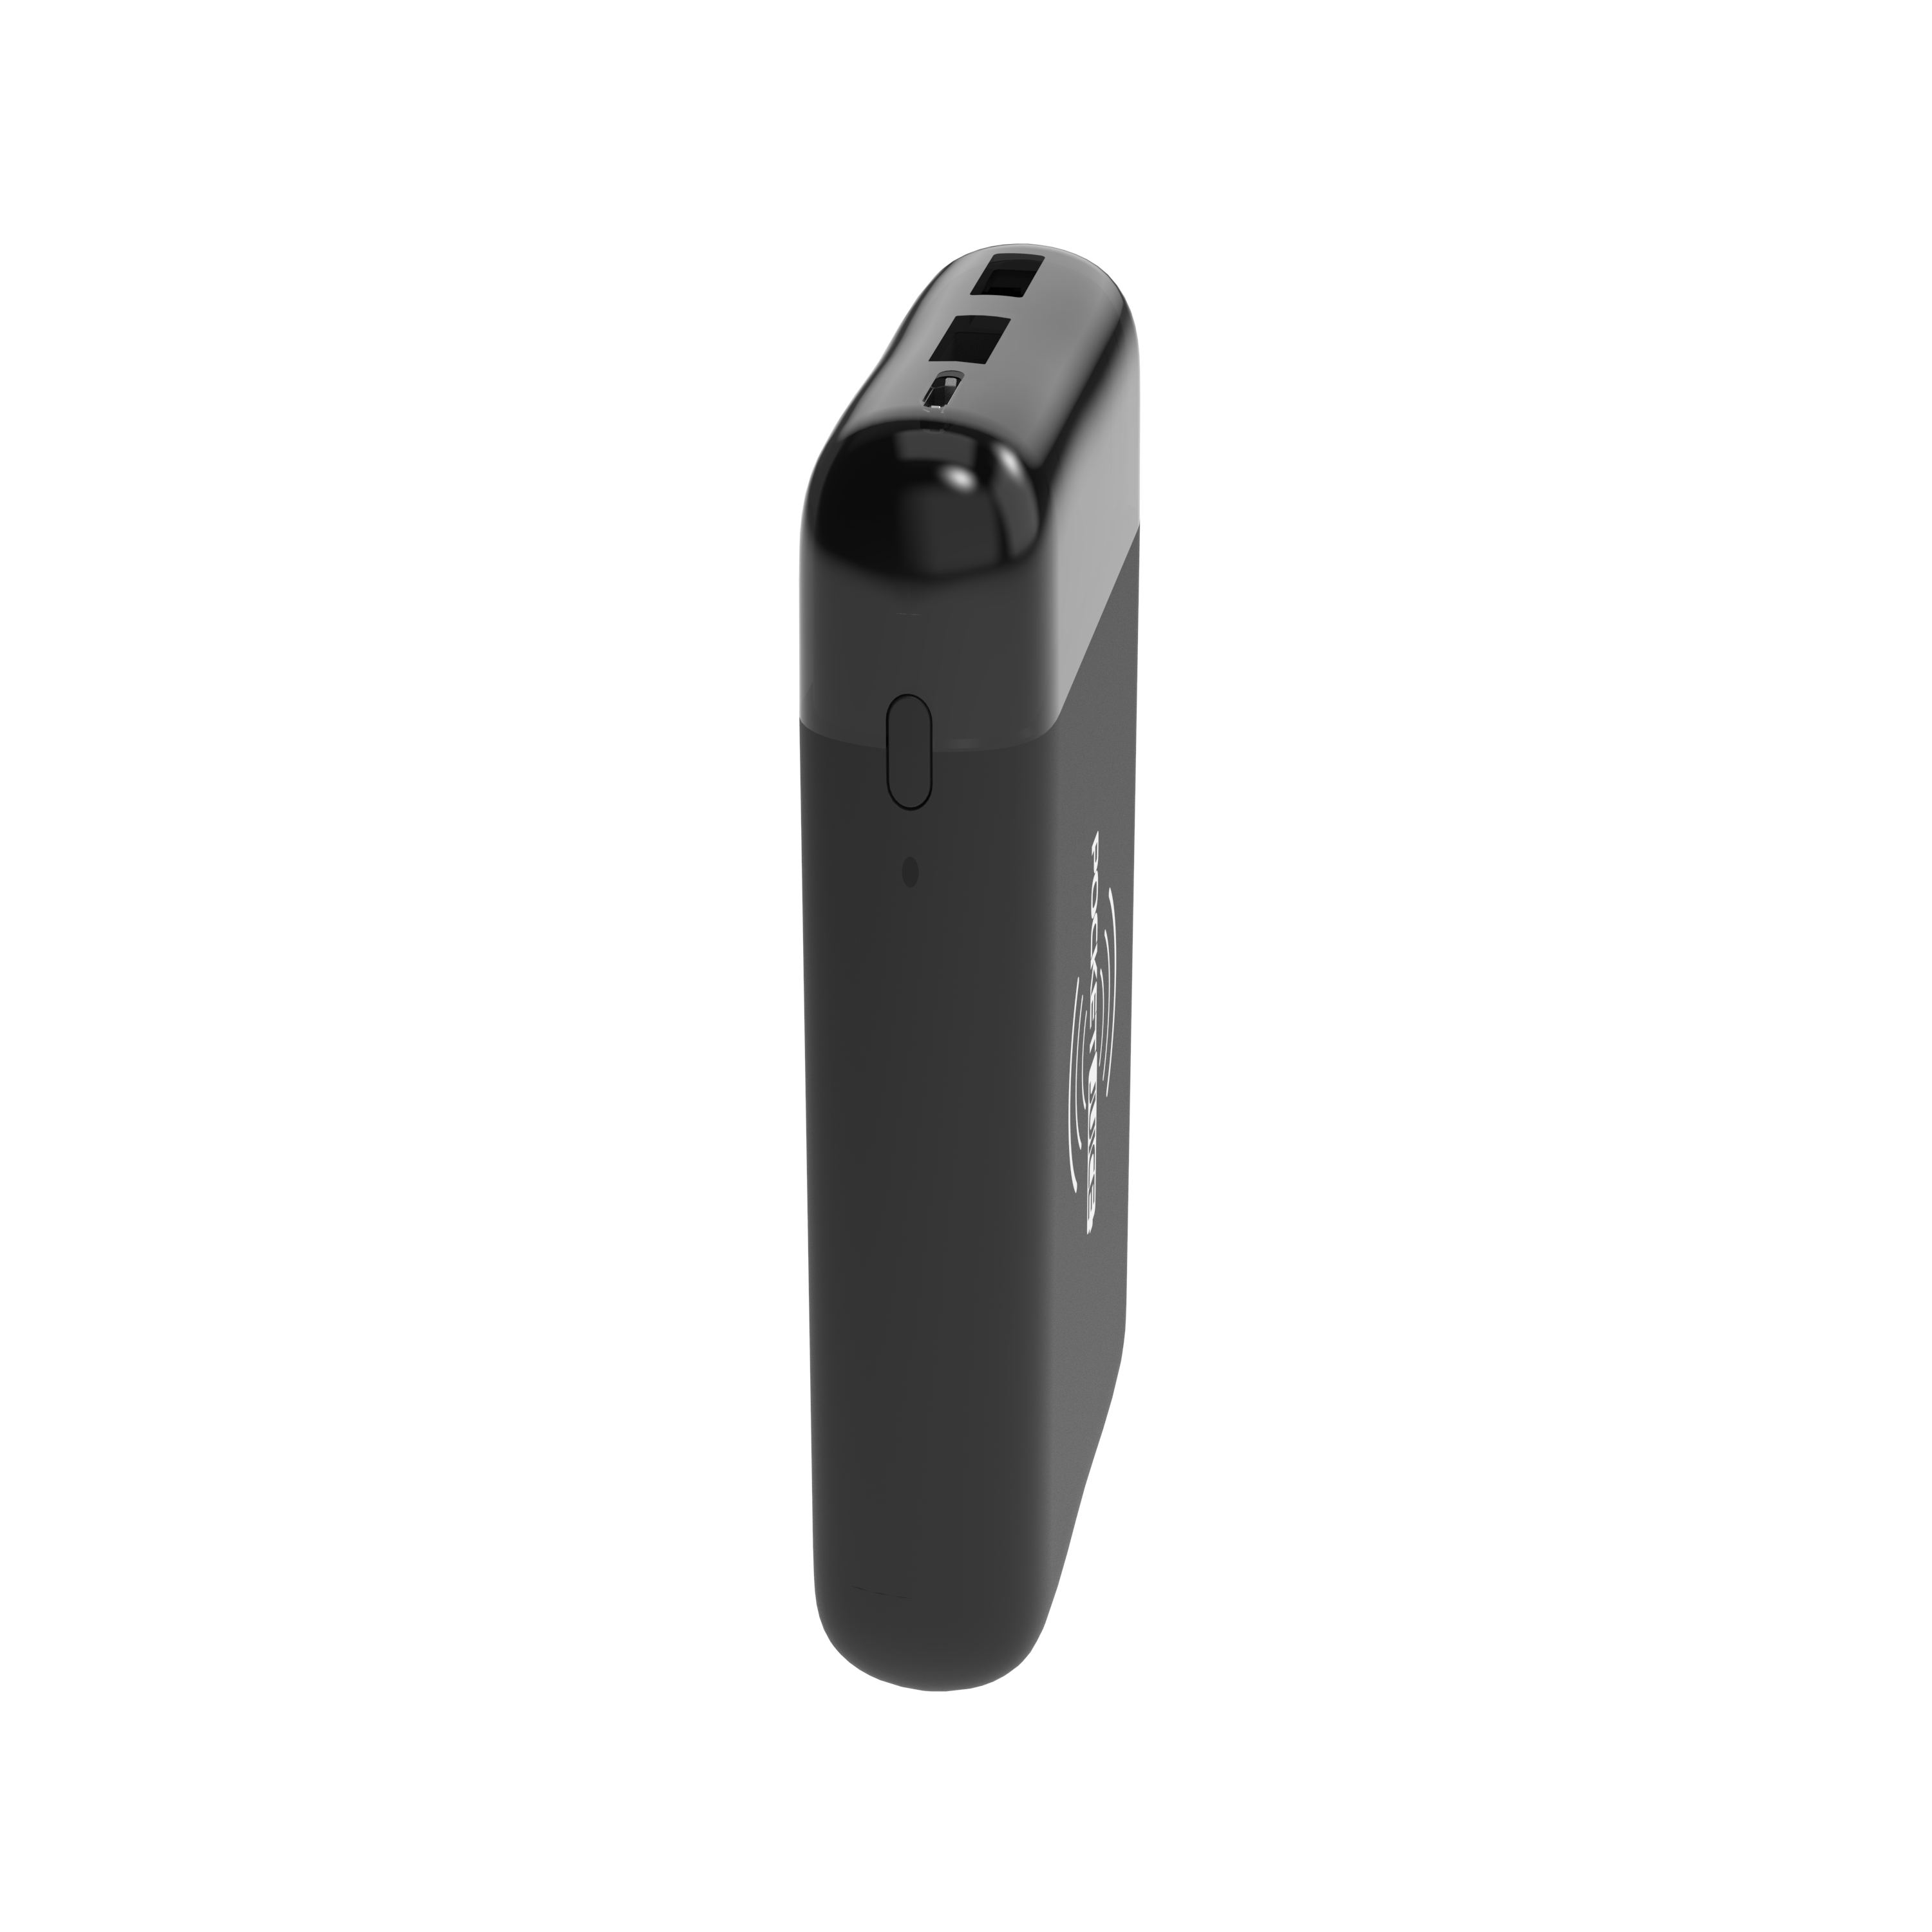 Dove Technologies - Rechargeable 3,350 mAh Powerbank, 1 Day Portable Charger